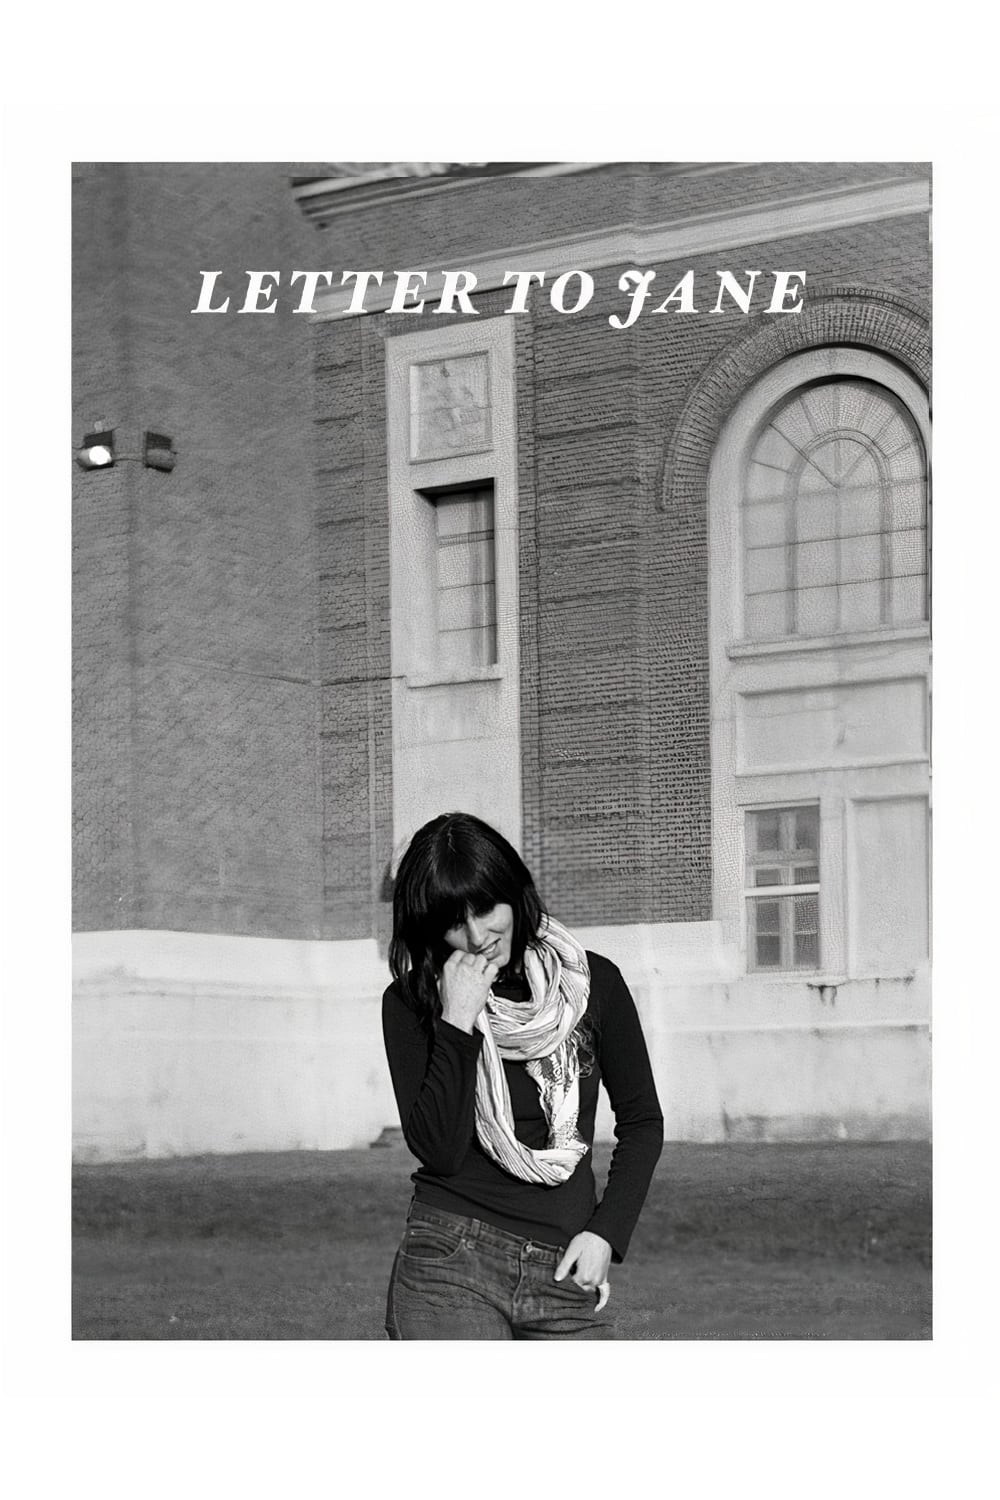 Letter to Jane